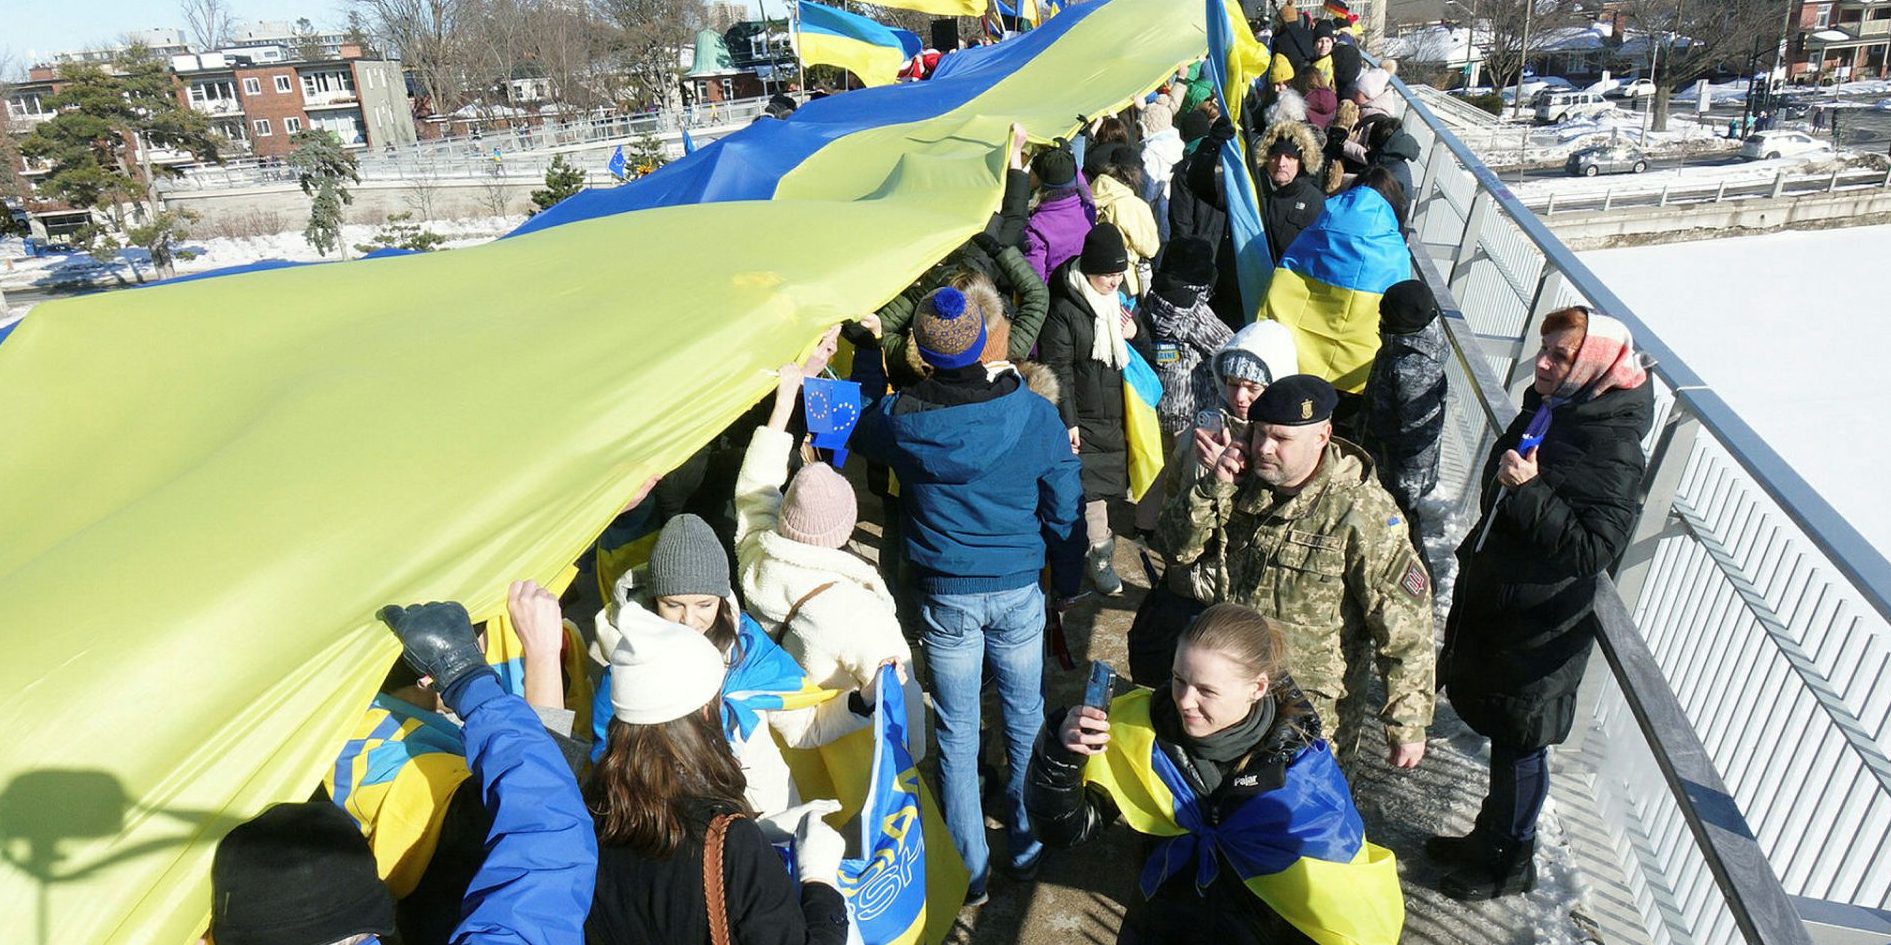 Attendees stretch out the massive Ukrainian flag.